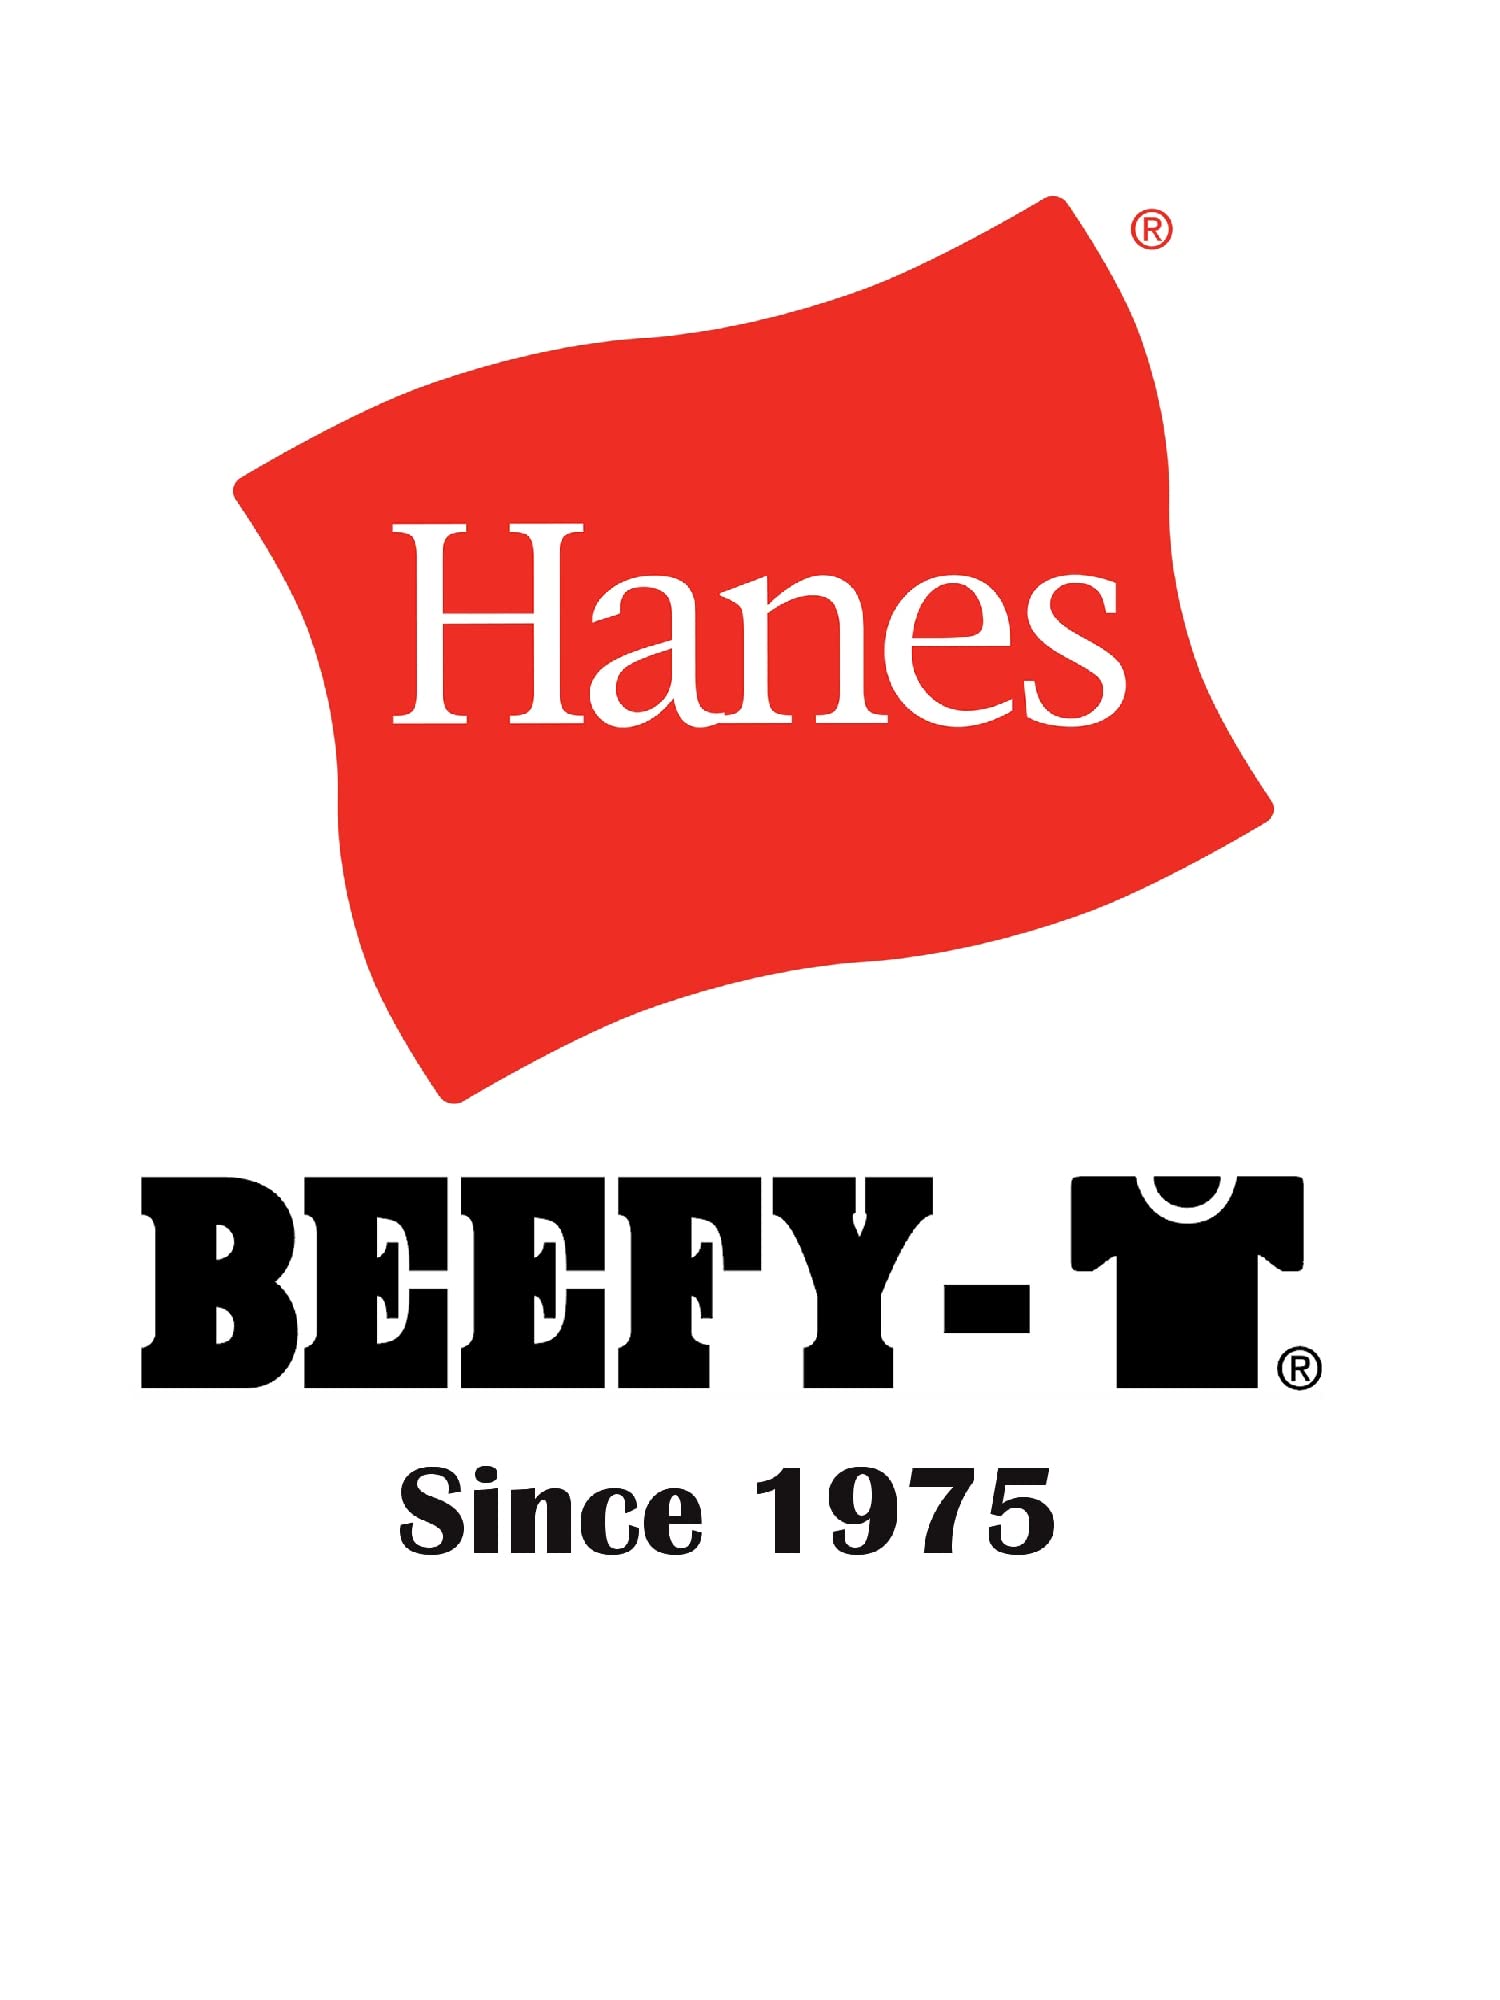 Hanes Men's Standard BeefyT T-Shirt, Heavyweight Cotton Crewneck Tee, 1 or 2 Pack, Available in Tall Sizes, DEEP Forest-1 Pack, 4X Large